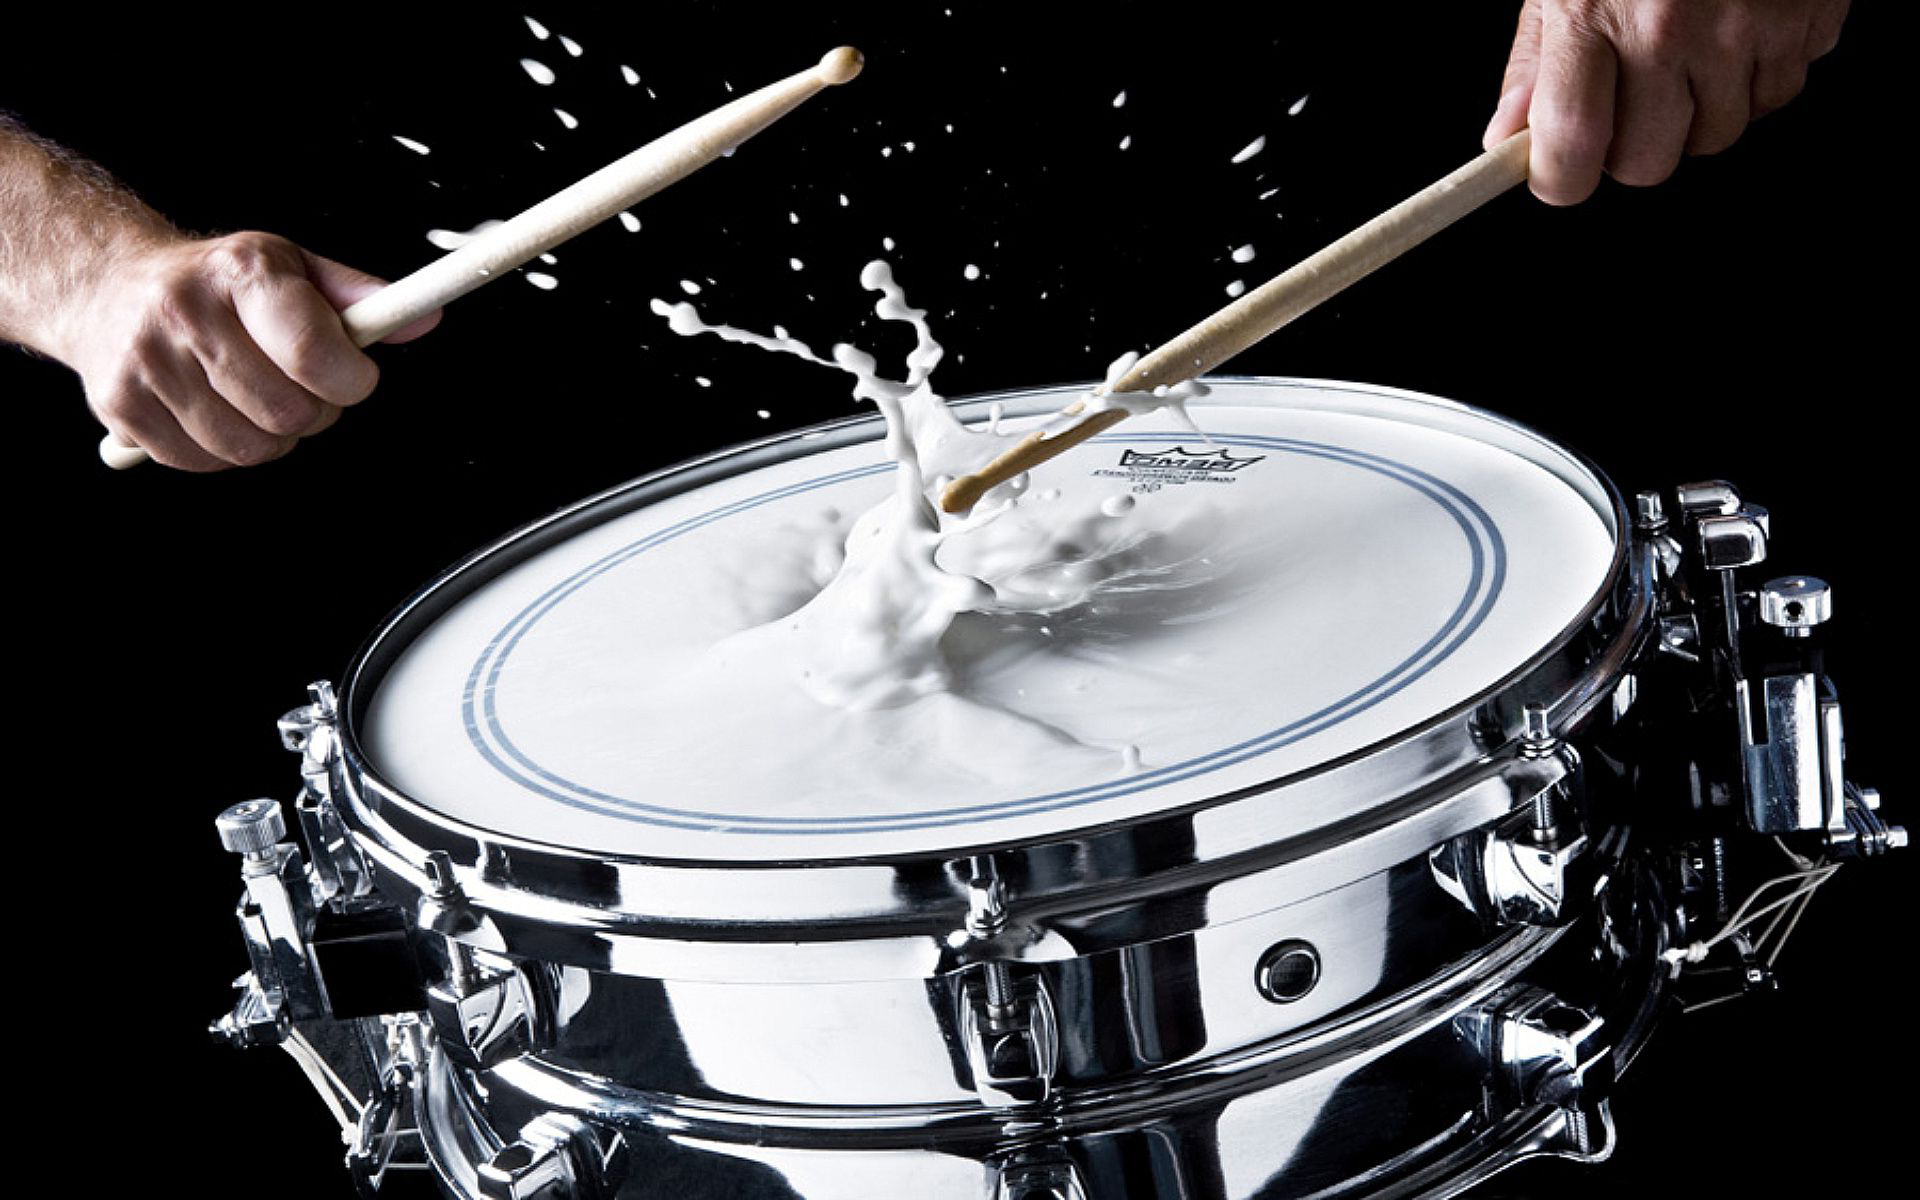 4k Drums Wallpaper High Quality